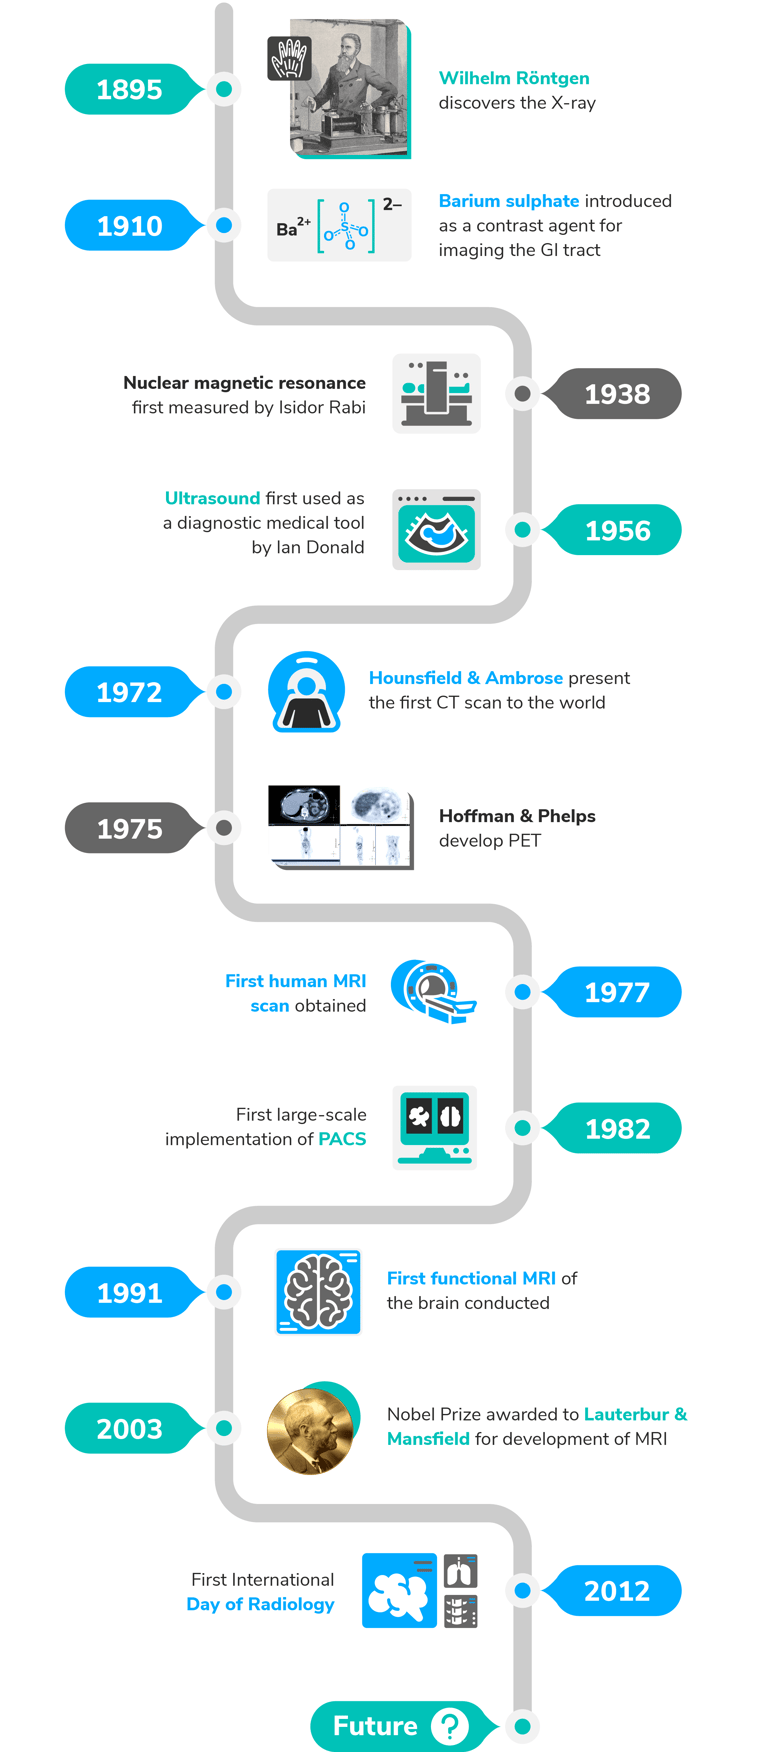 The future of radiology, as told by its past timeline